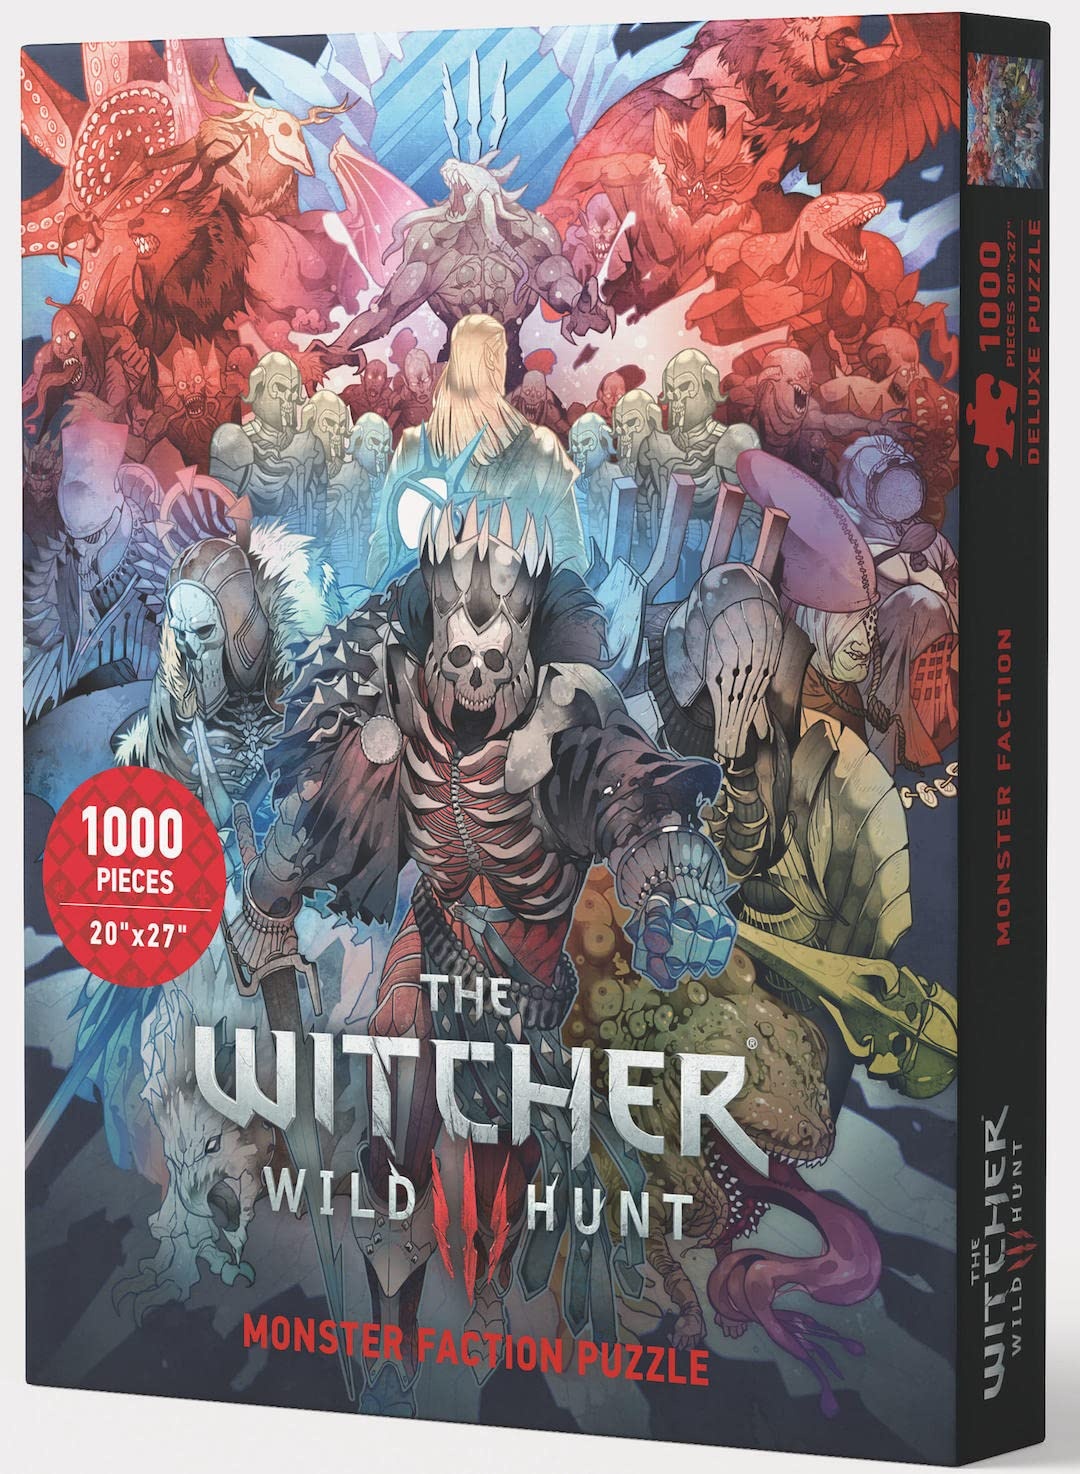 Dark Horse - The Witcher 3 - Wild Hunt: Monster Faction Puzzle